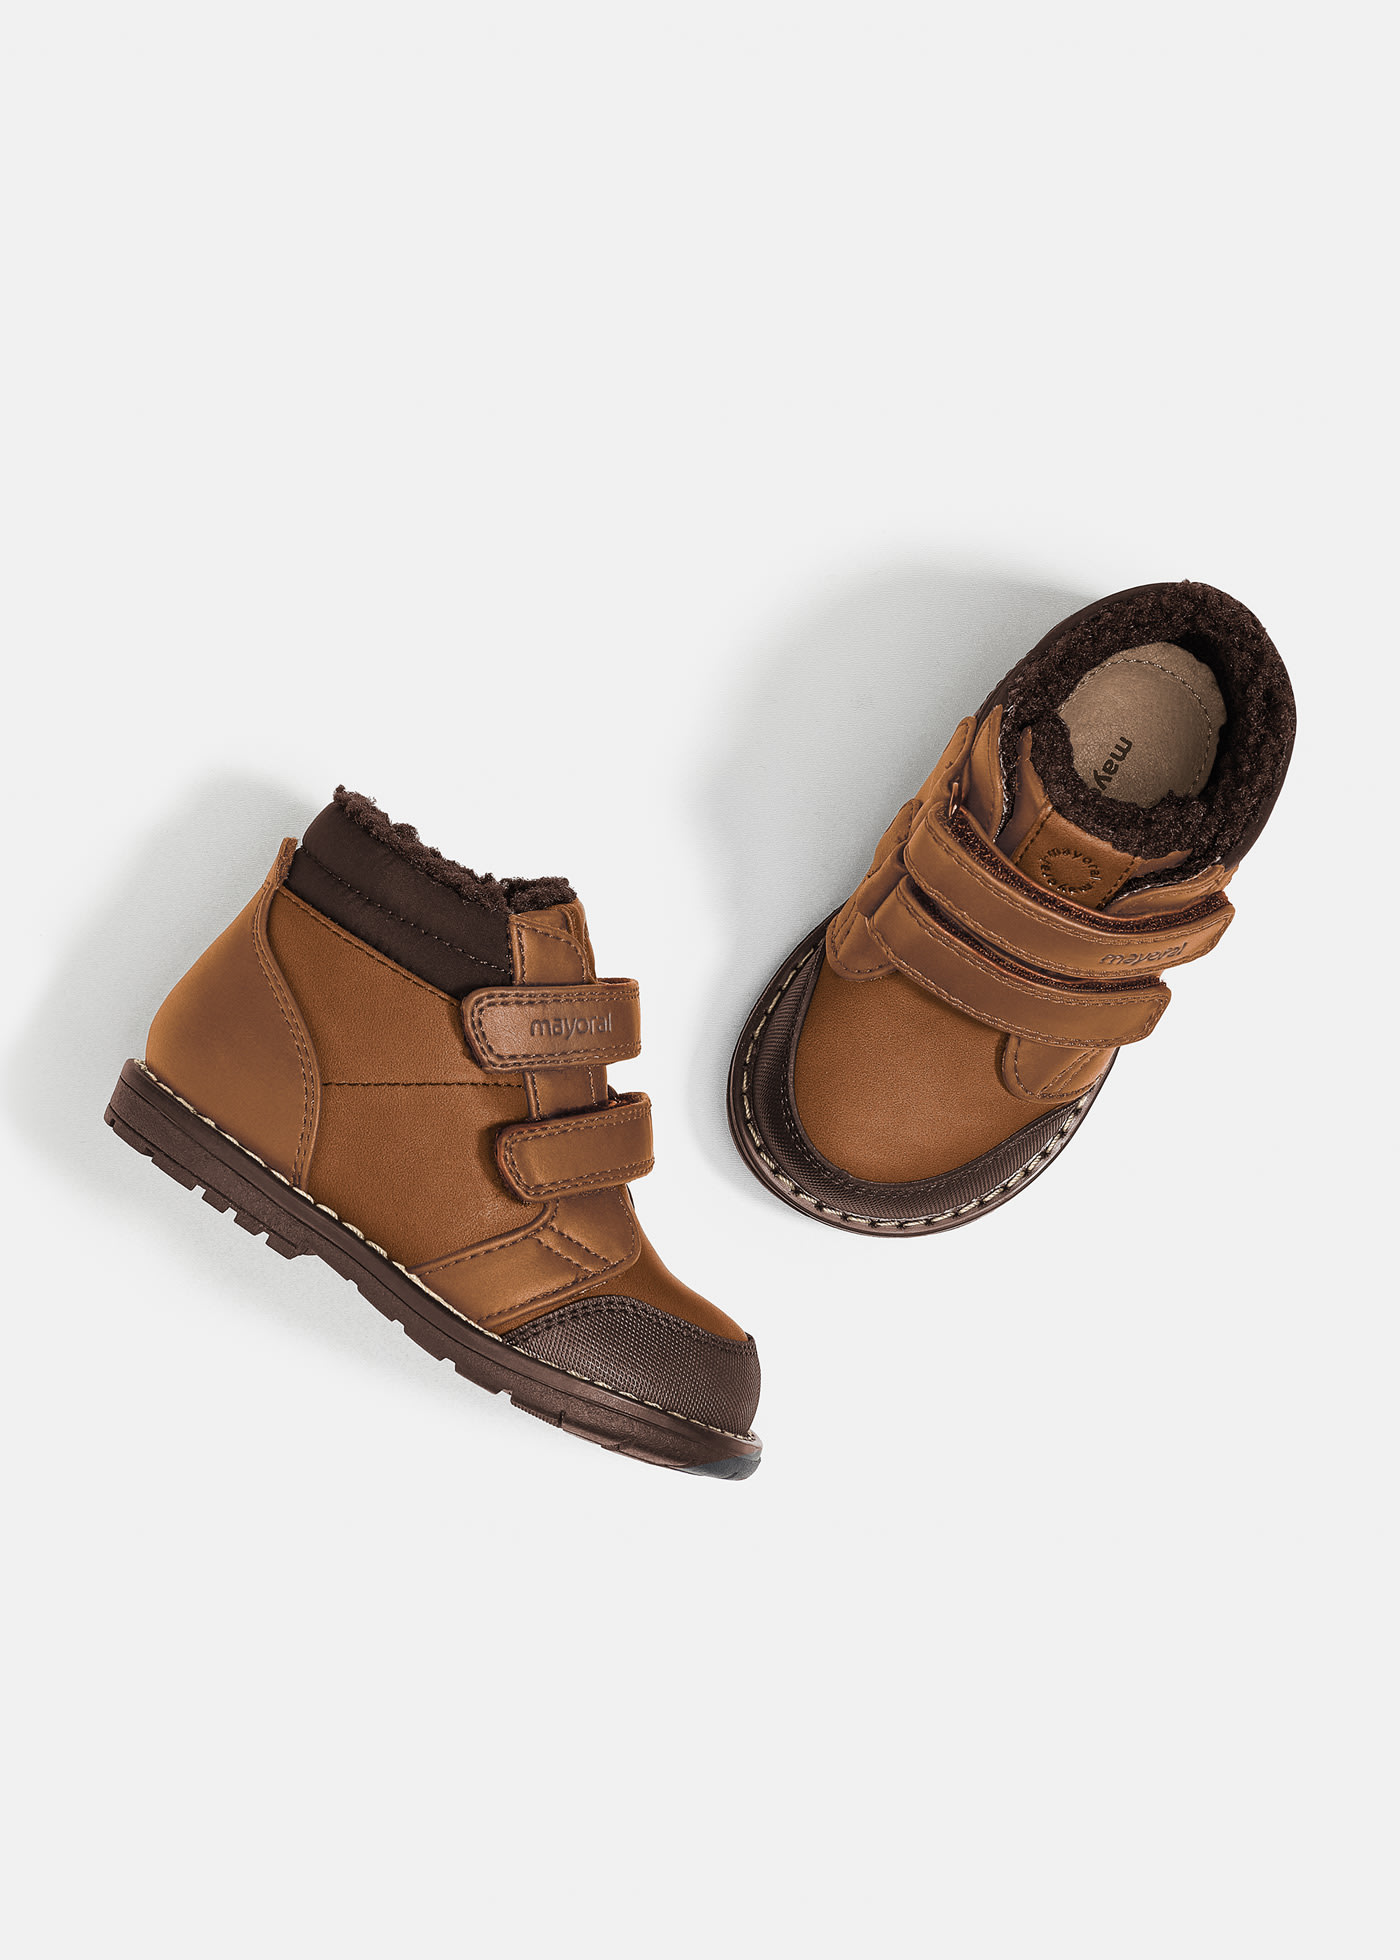 Baby mountain boots